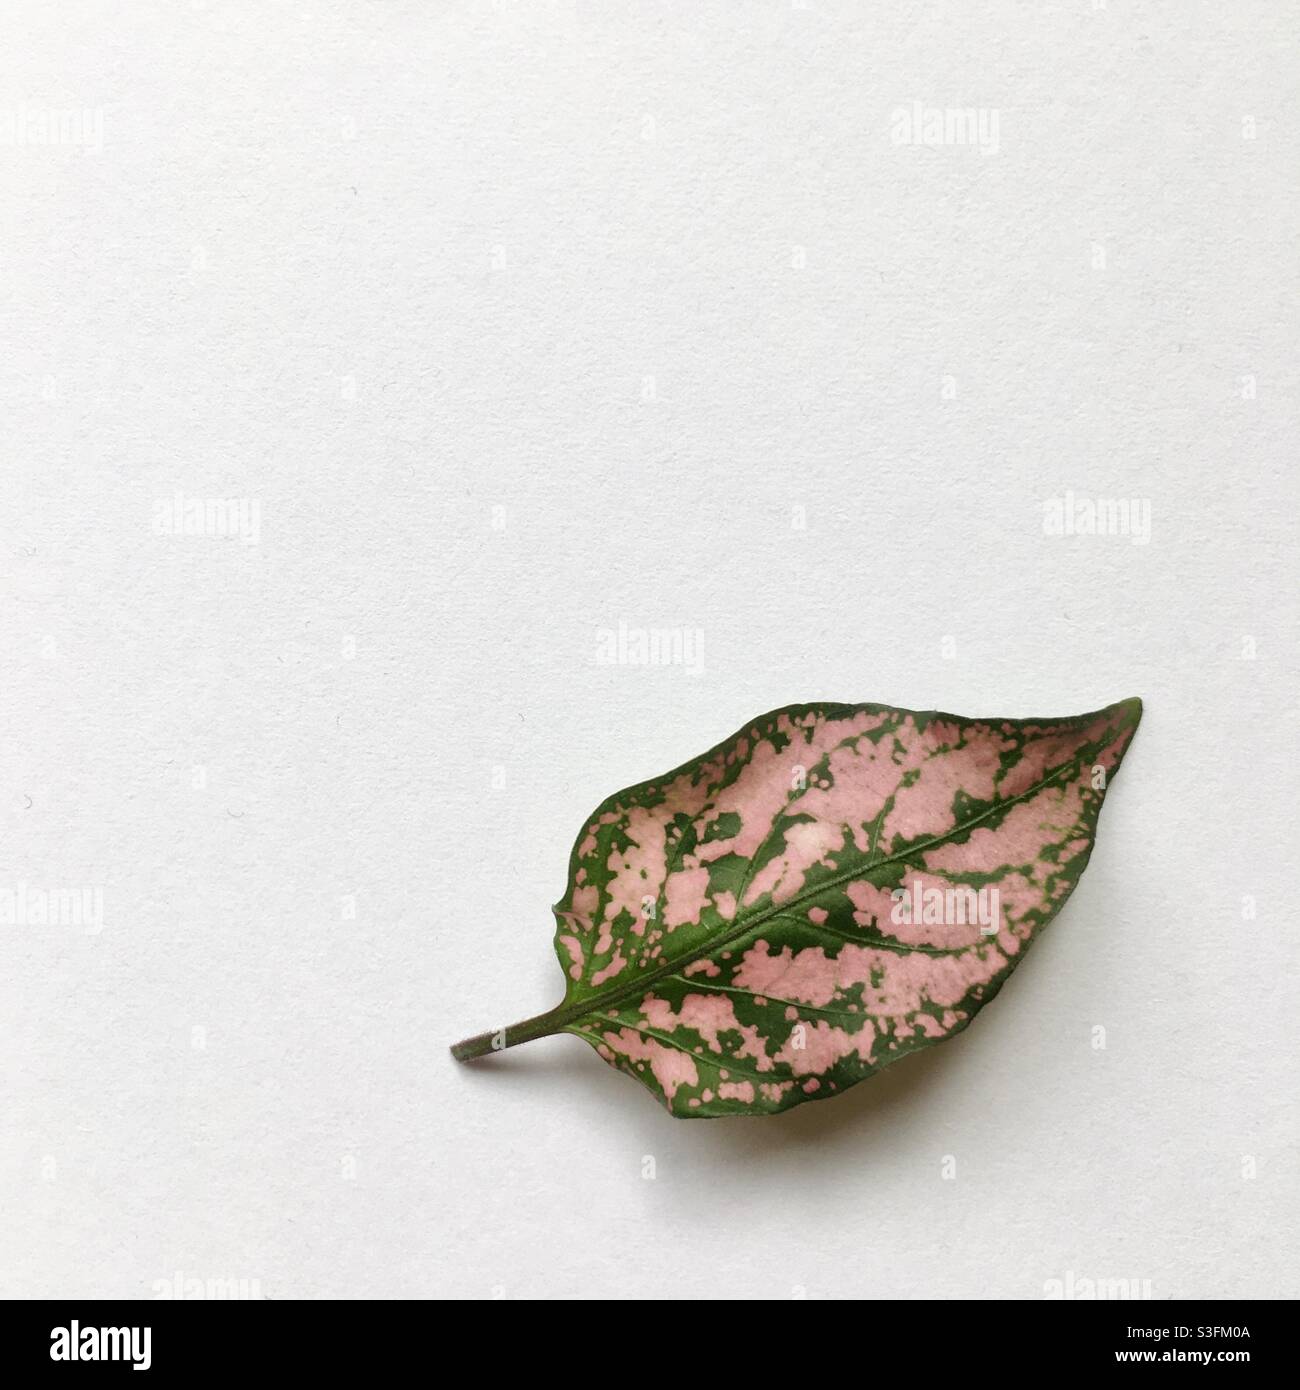 Single pink and green leaf from a hypoestes phyllostachya - polka dot plant - on a plain white background. Stock Photo